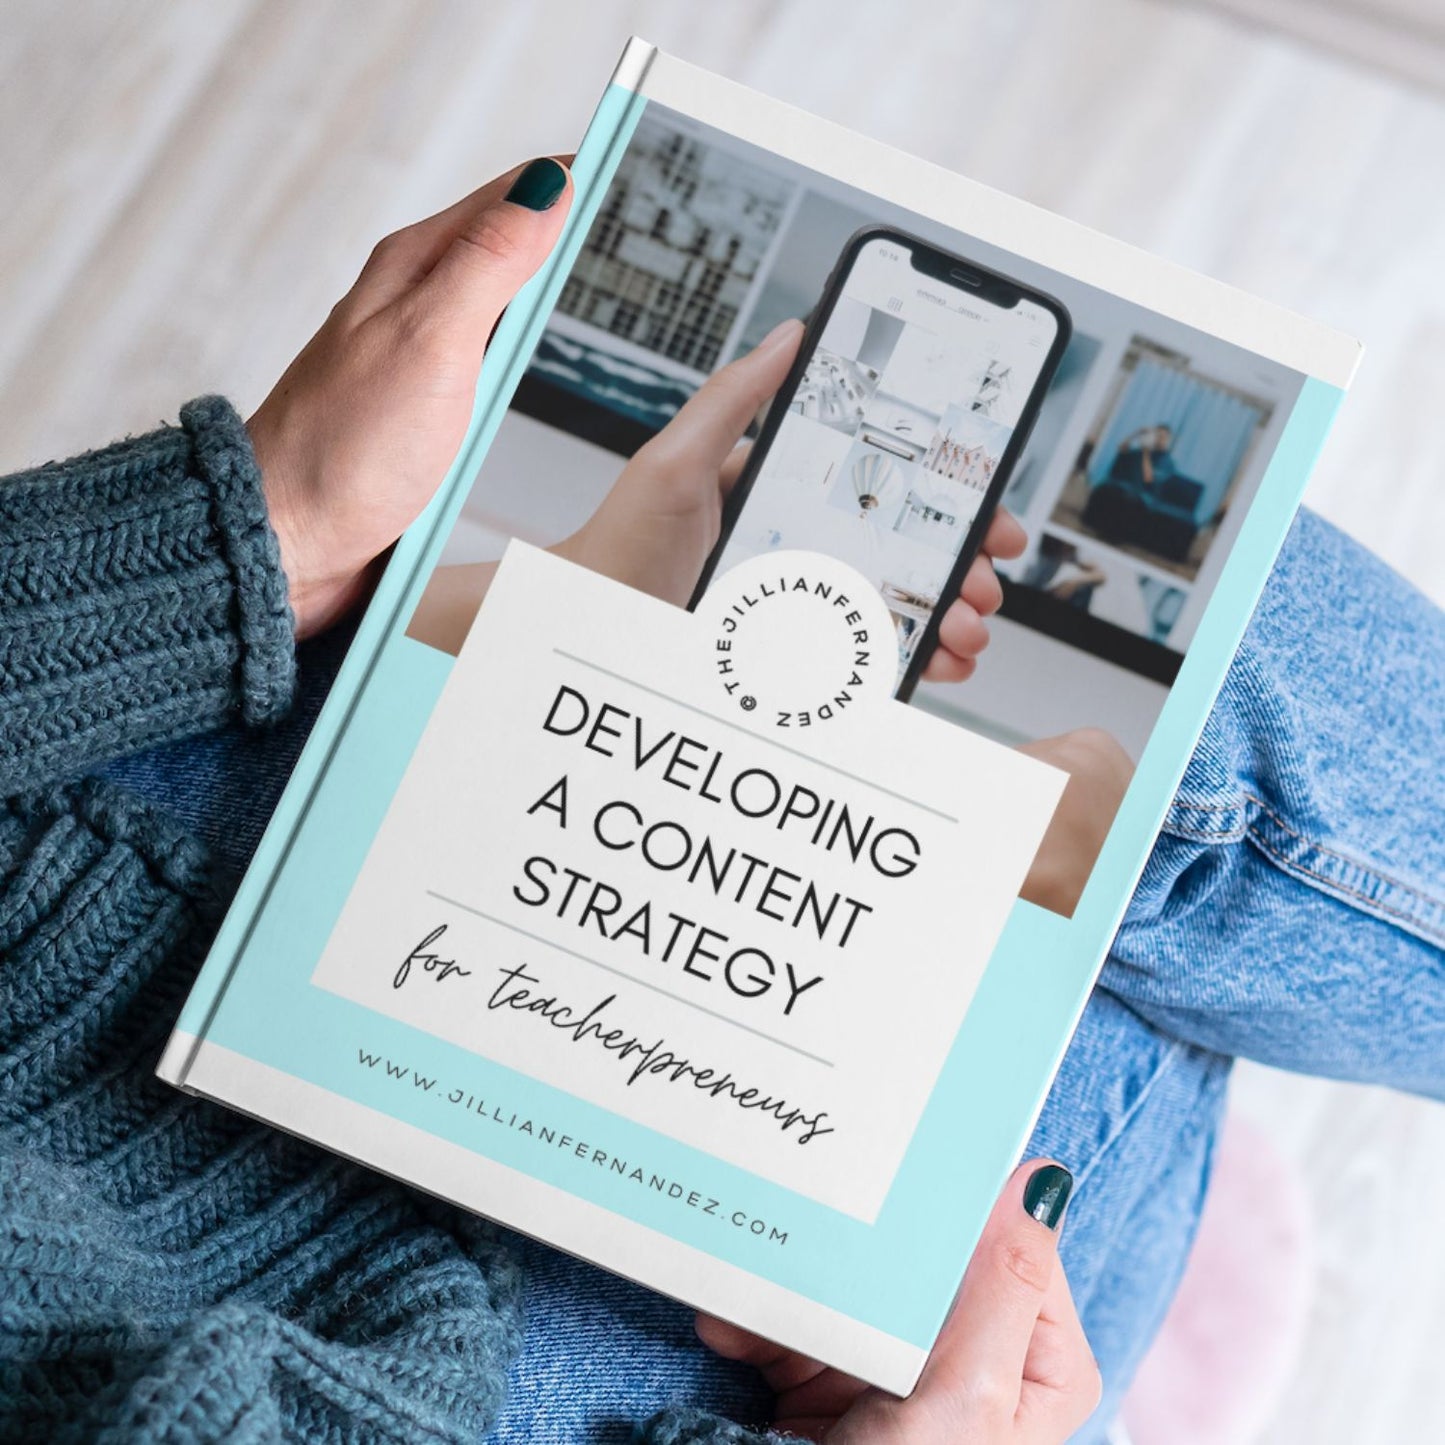 DEVELOPING A CONTENT STRATEGY GUIDE